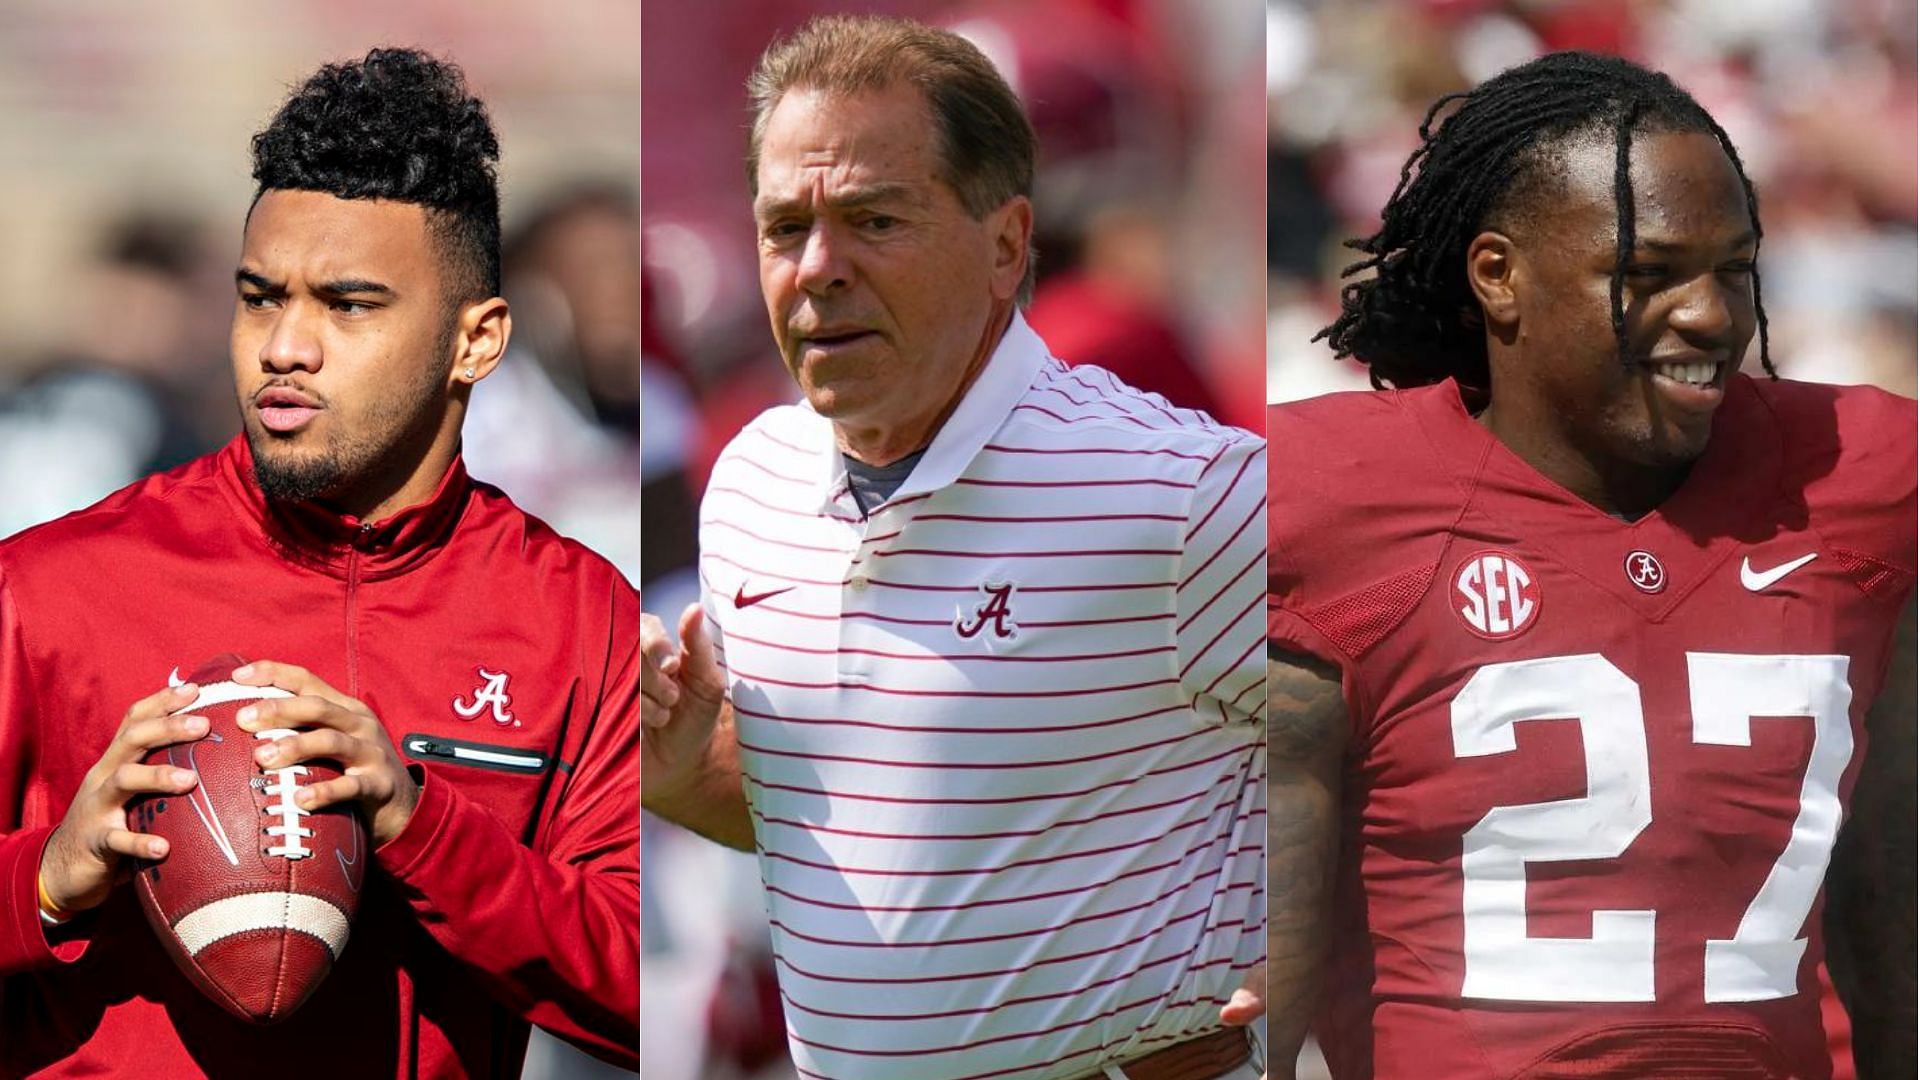 5 players who made it big in the NFL after working with Nick Saban at Alabama